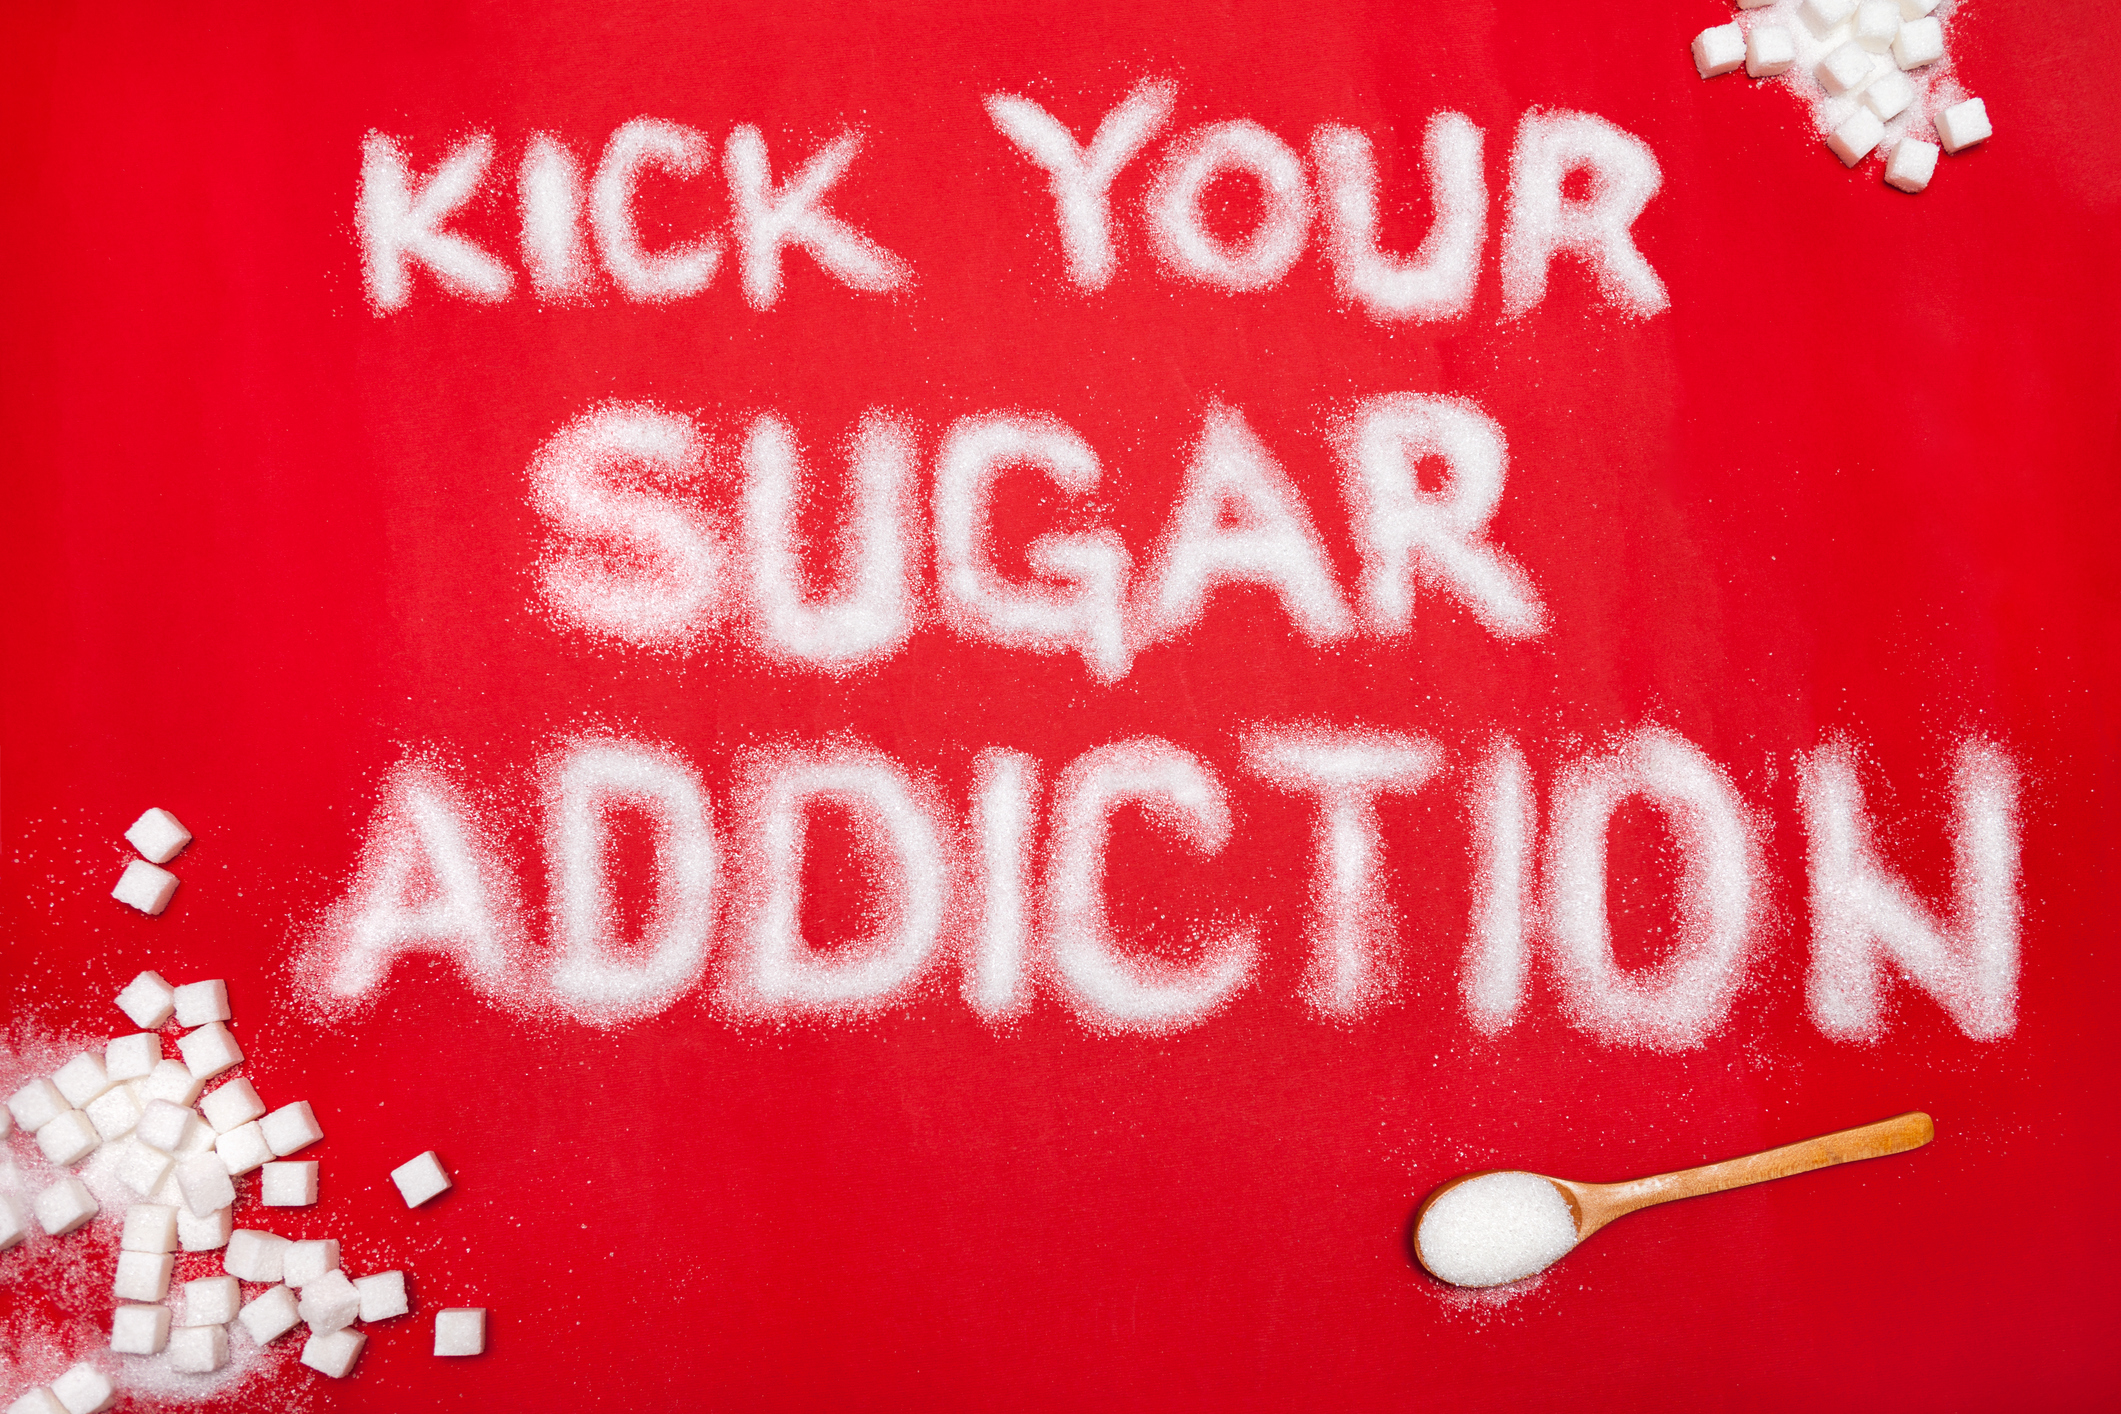 Diabetes awareness month: the science behind sugar addiction - In Depth